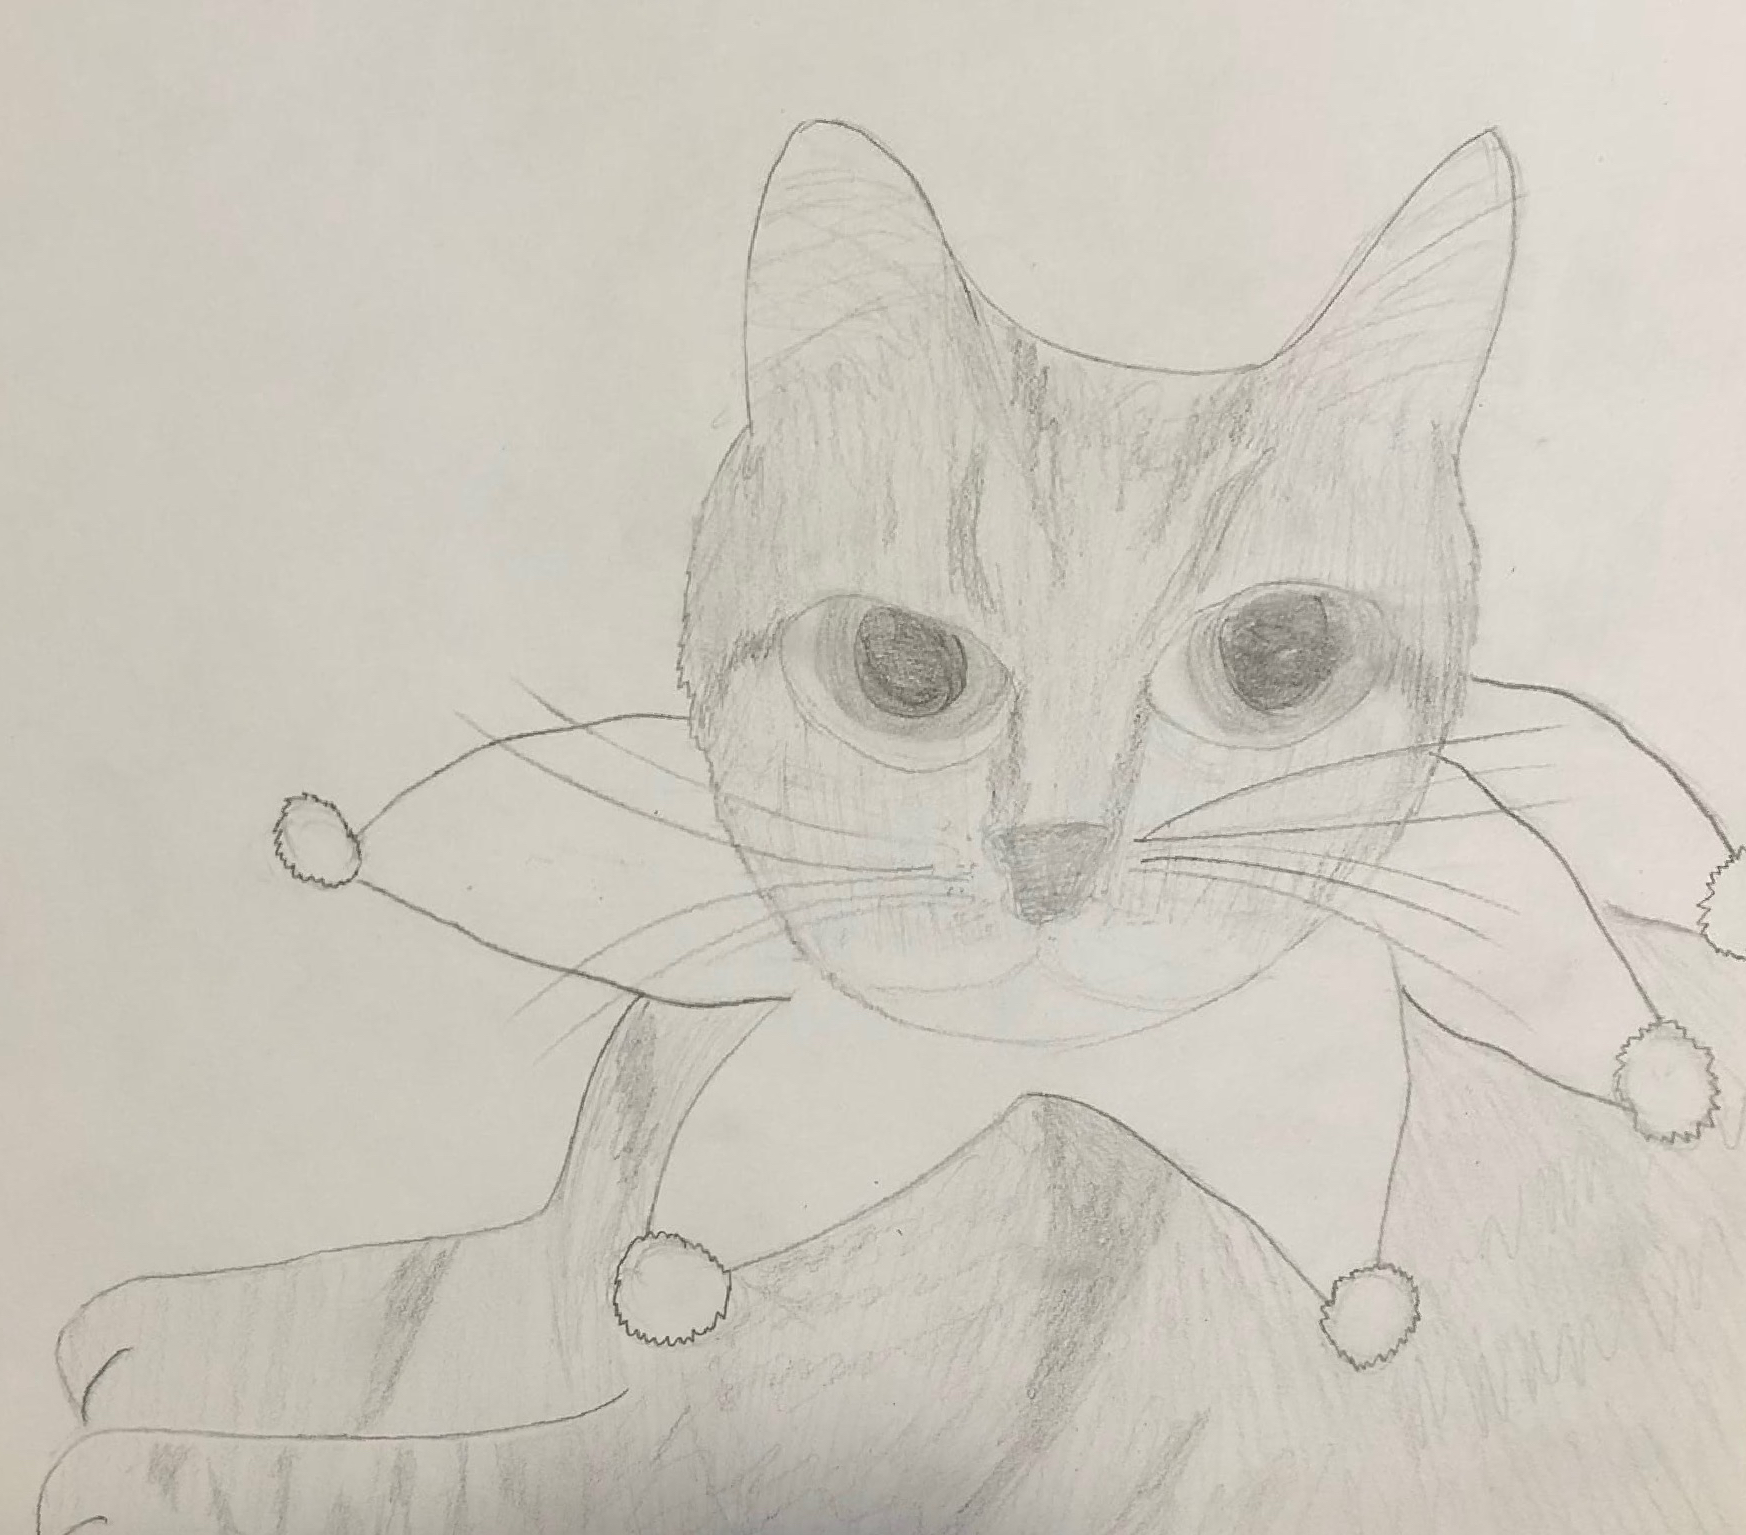 A dubiously drawn cat.